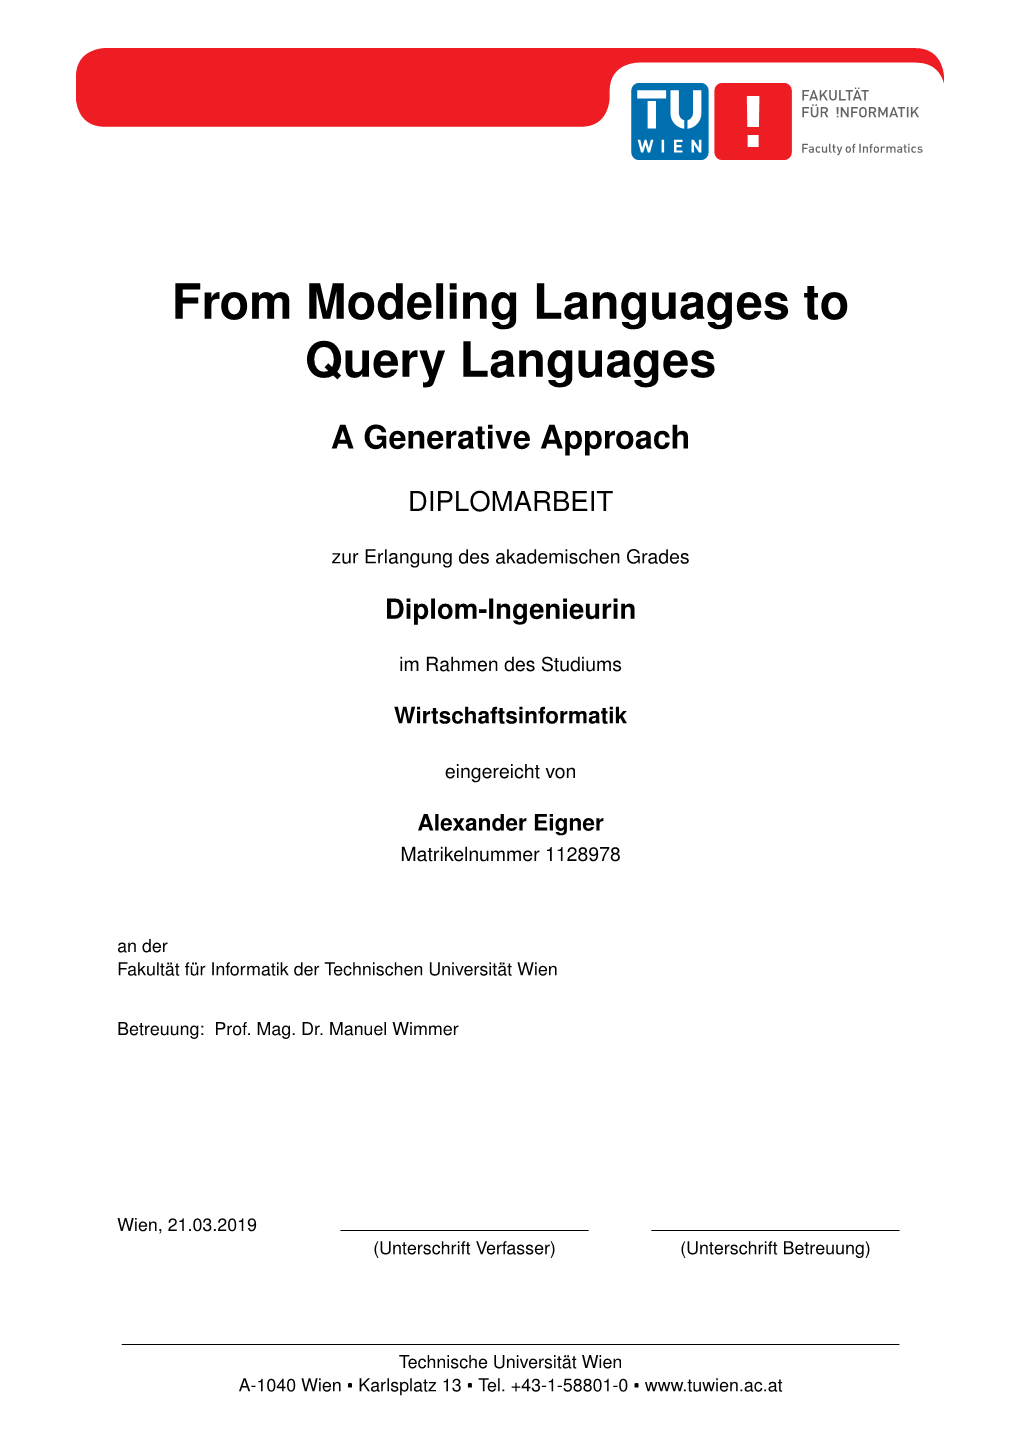 From Modeling Languages to Query Languages